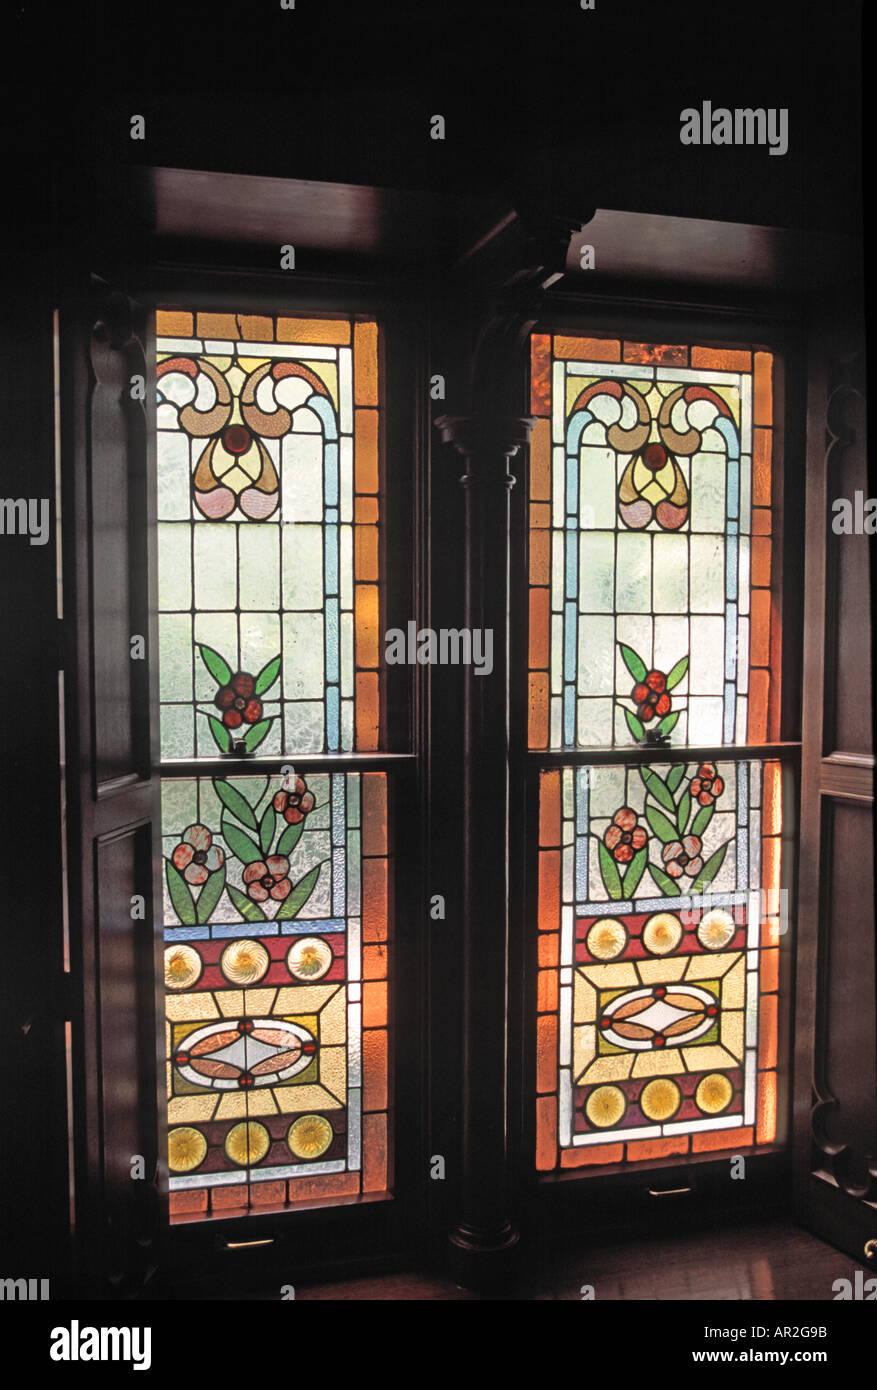 Stained glass windows at Temple Square building. Mormon church, Salt Lake City, Utah, USA. Stock Photo